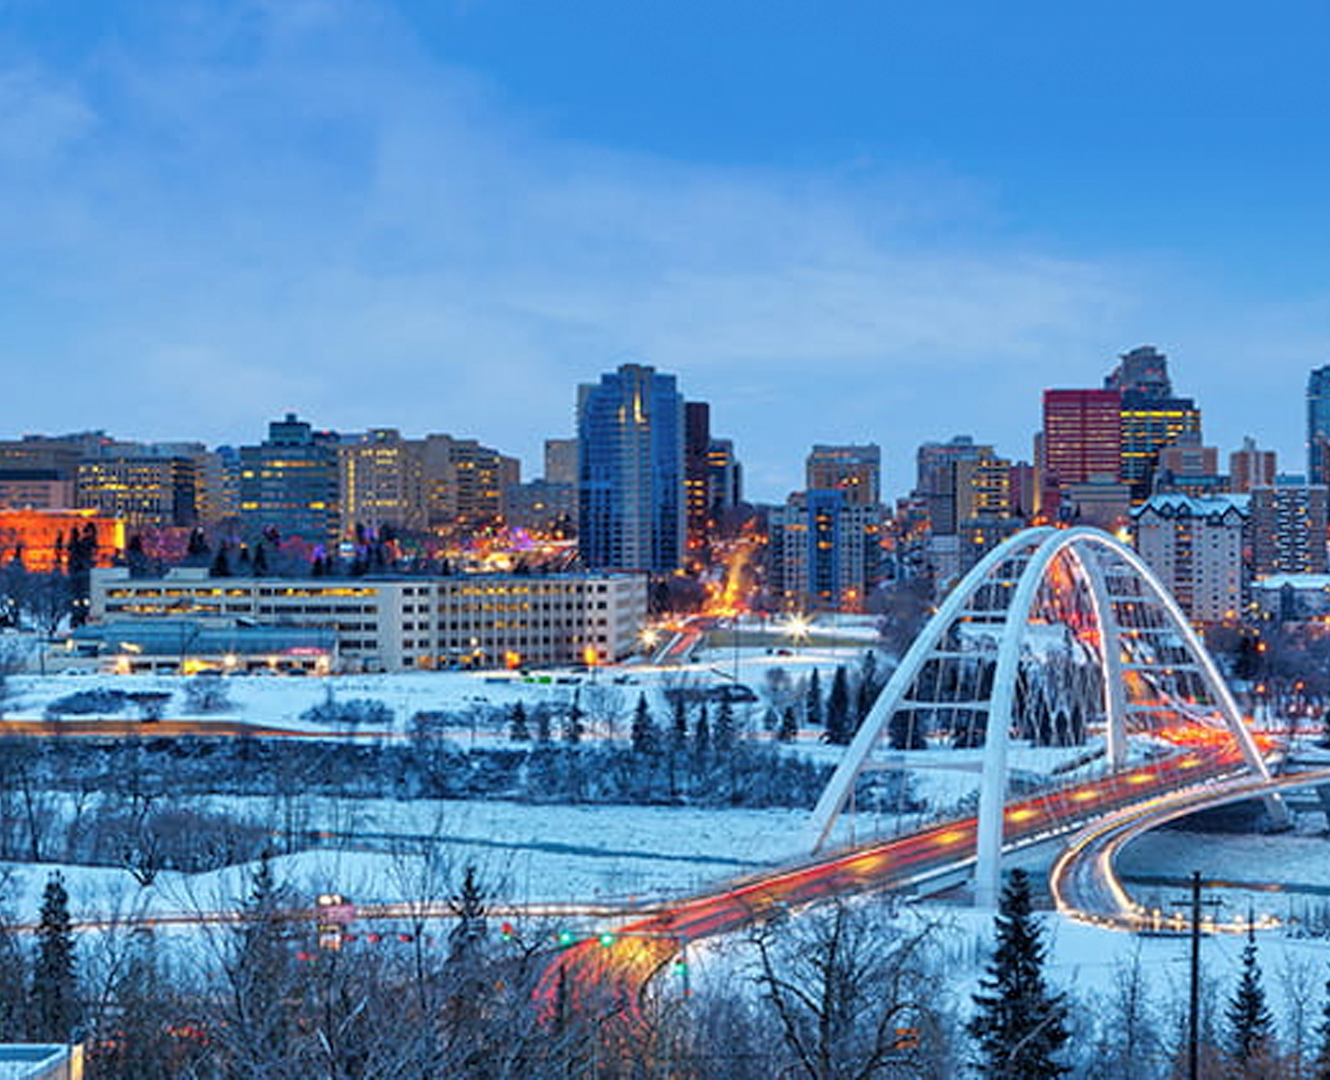 Edmonton in the Top 100 Cities in the World